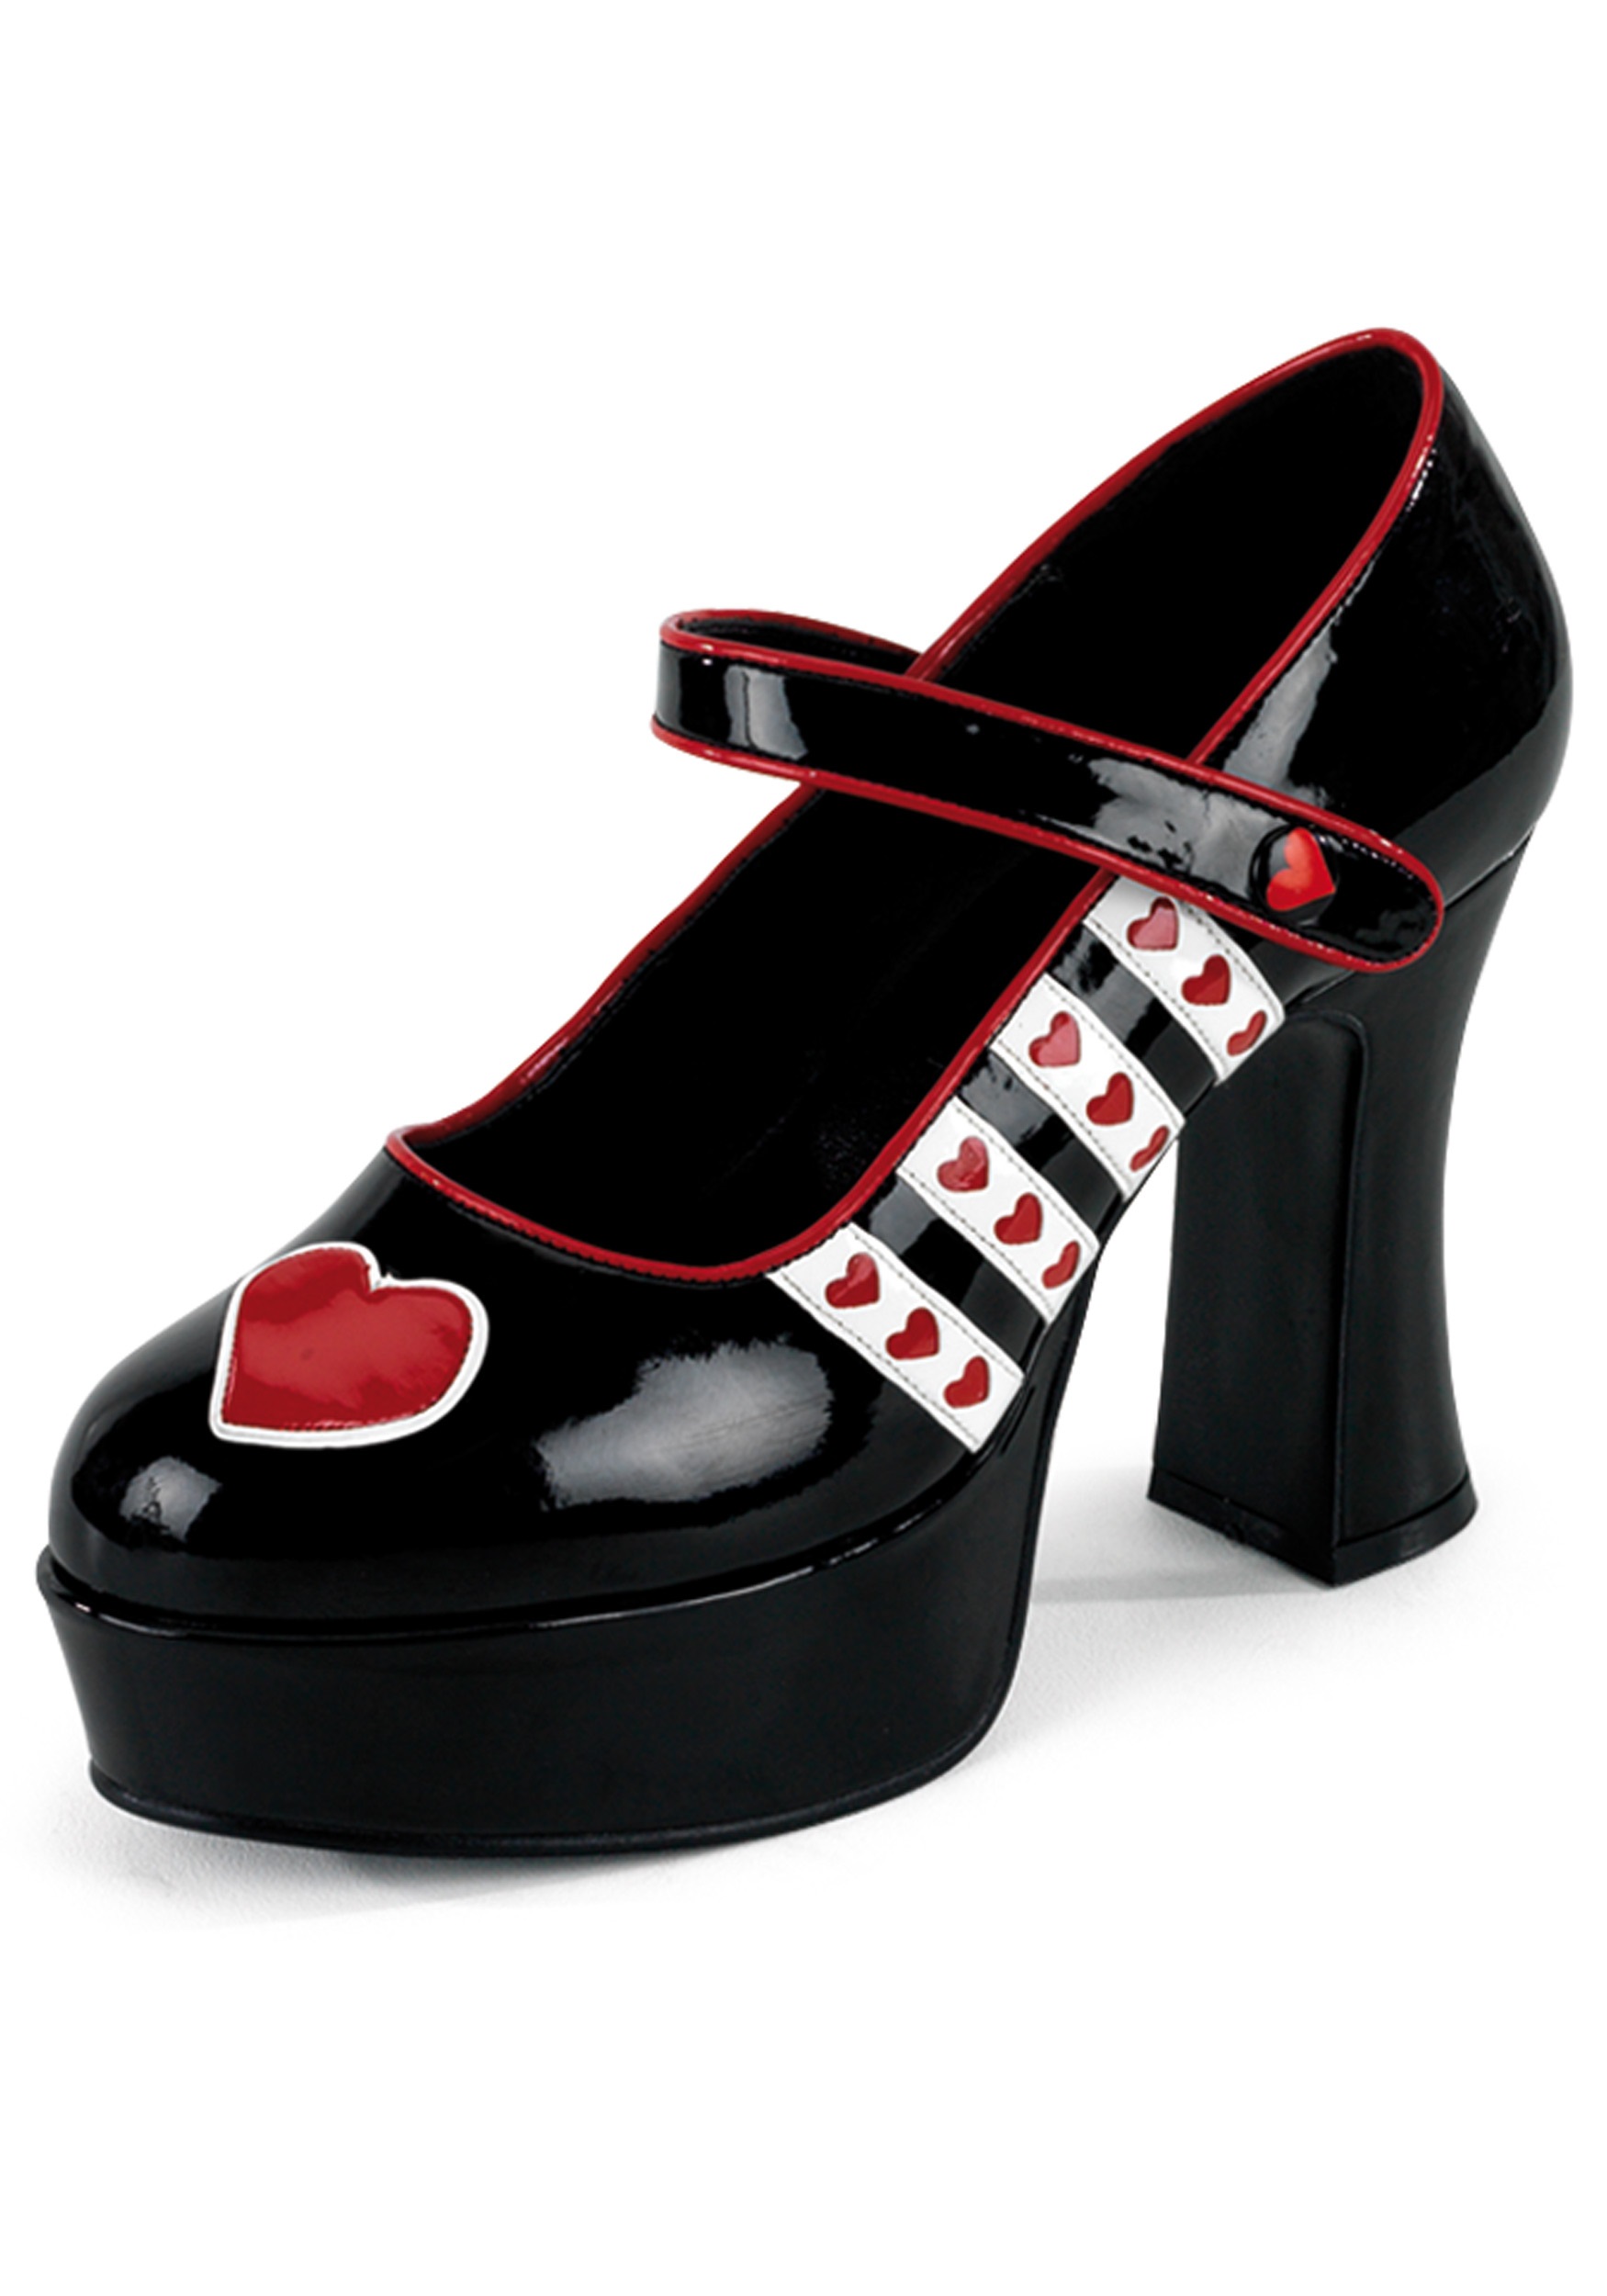 Waste float system Queen of Hearts Shoes